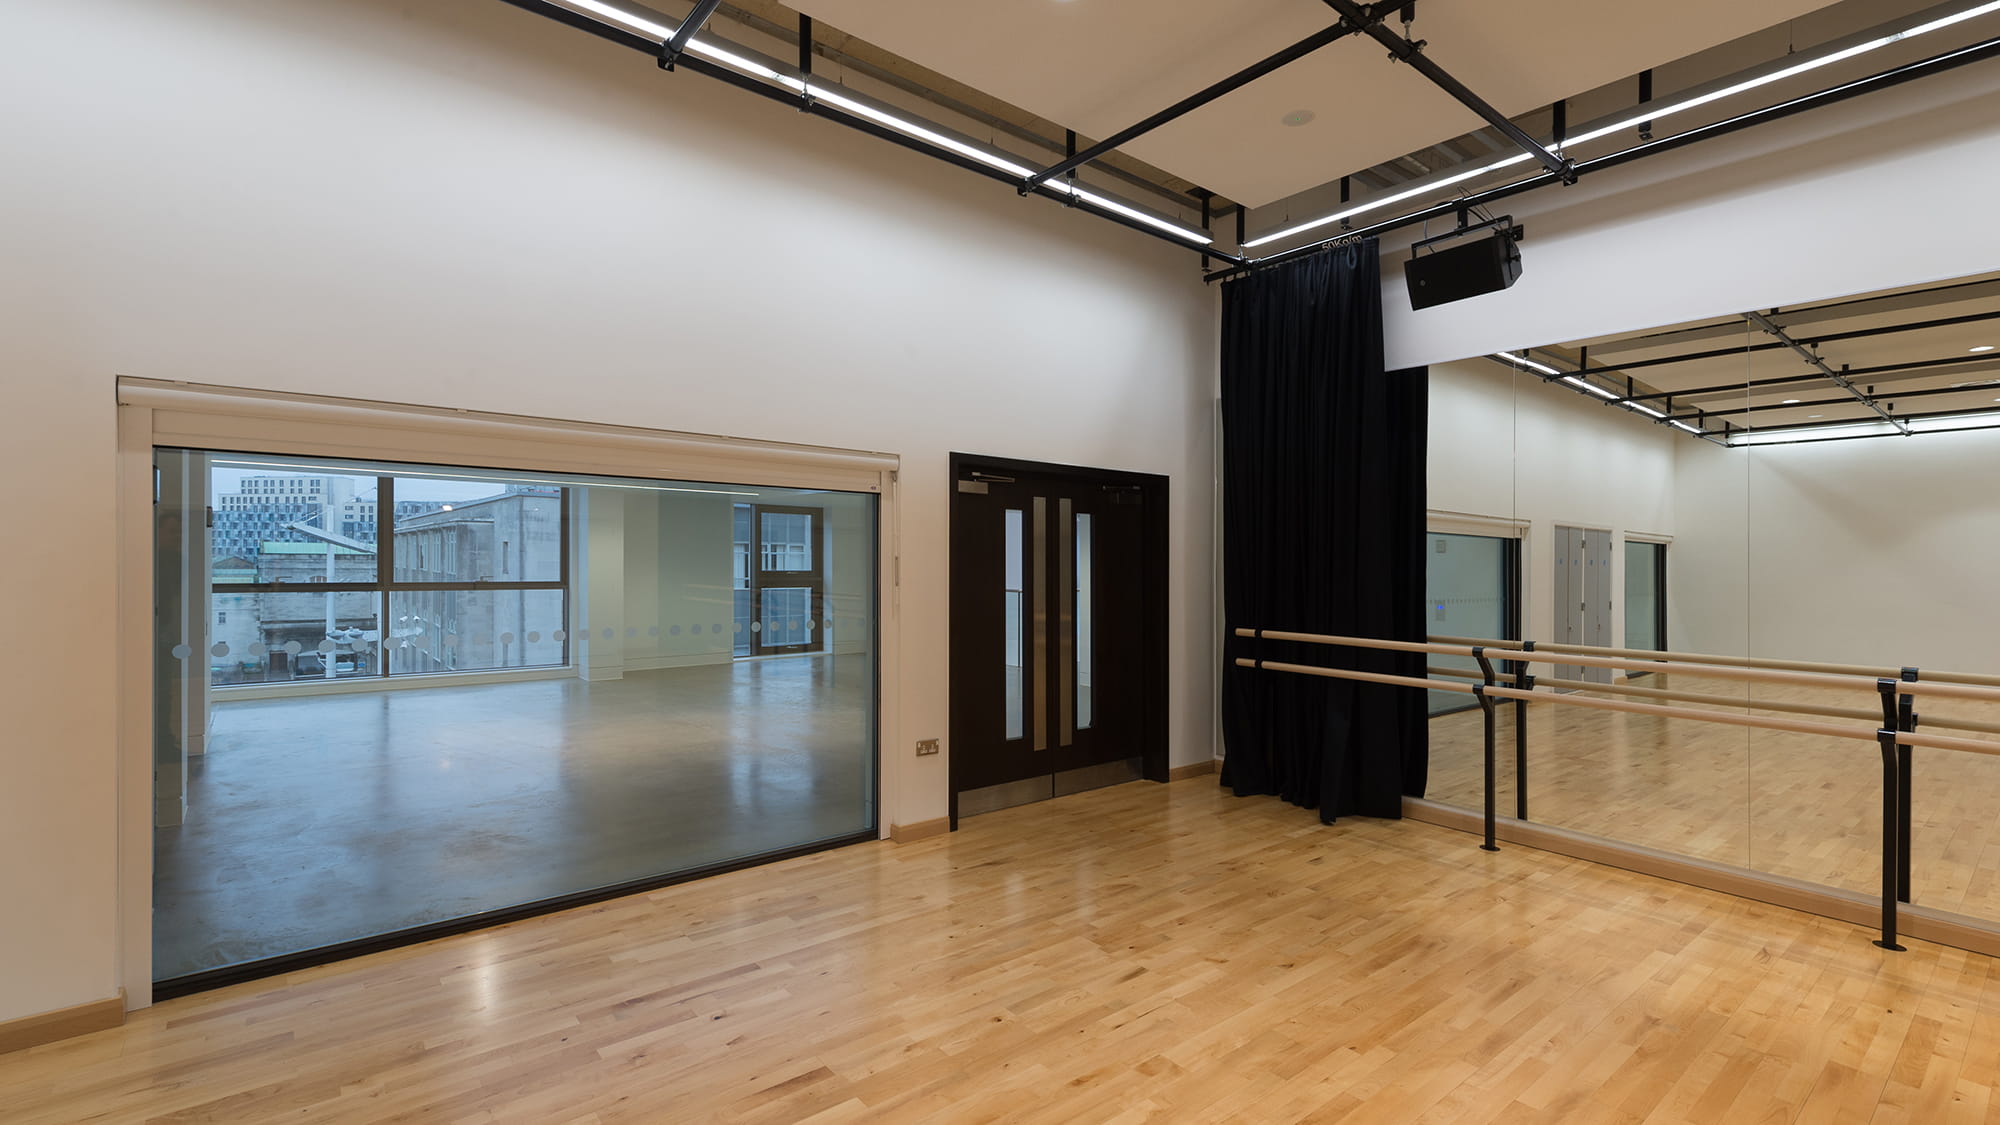 The dance studio within the North Building 